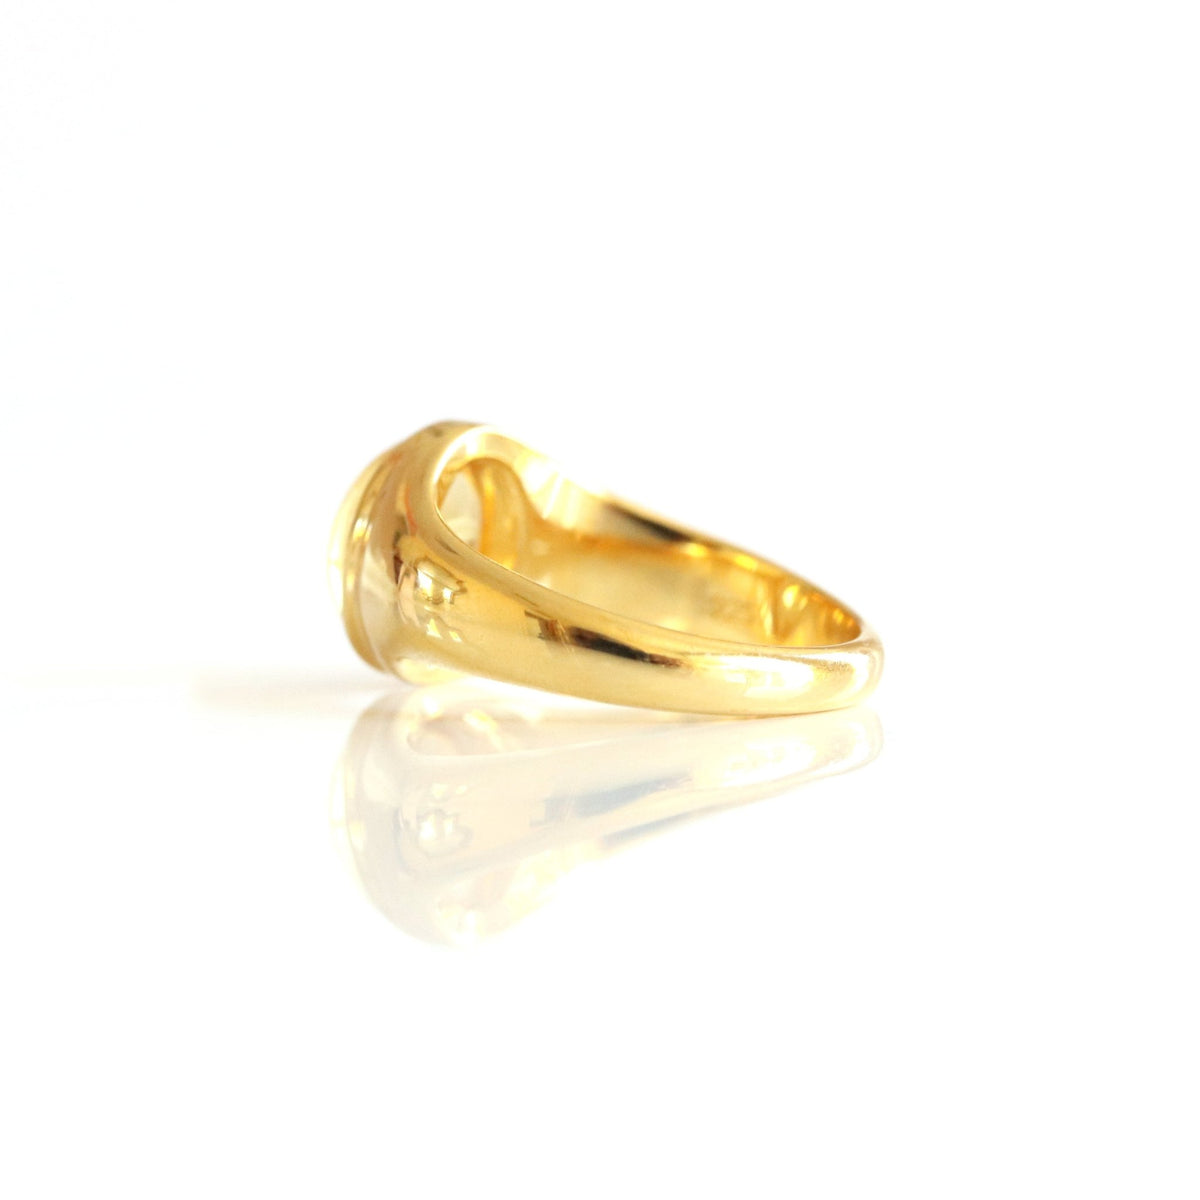 GLEE OVAL SIGNET RING - CITRINE &amp; GOLD - SO PRETTY CARA COTTER